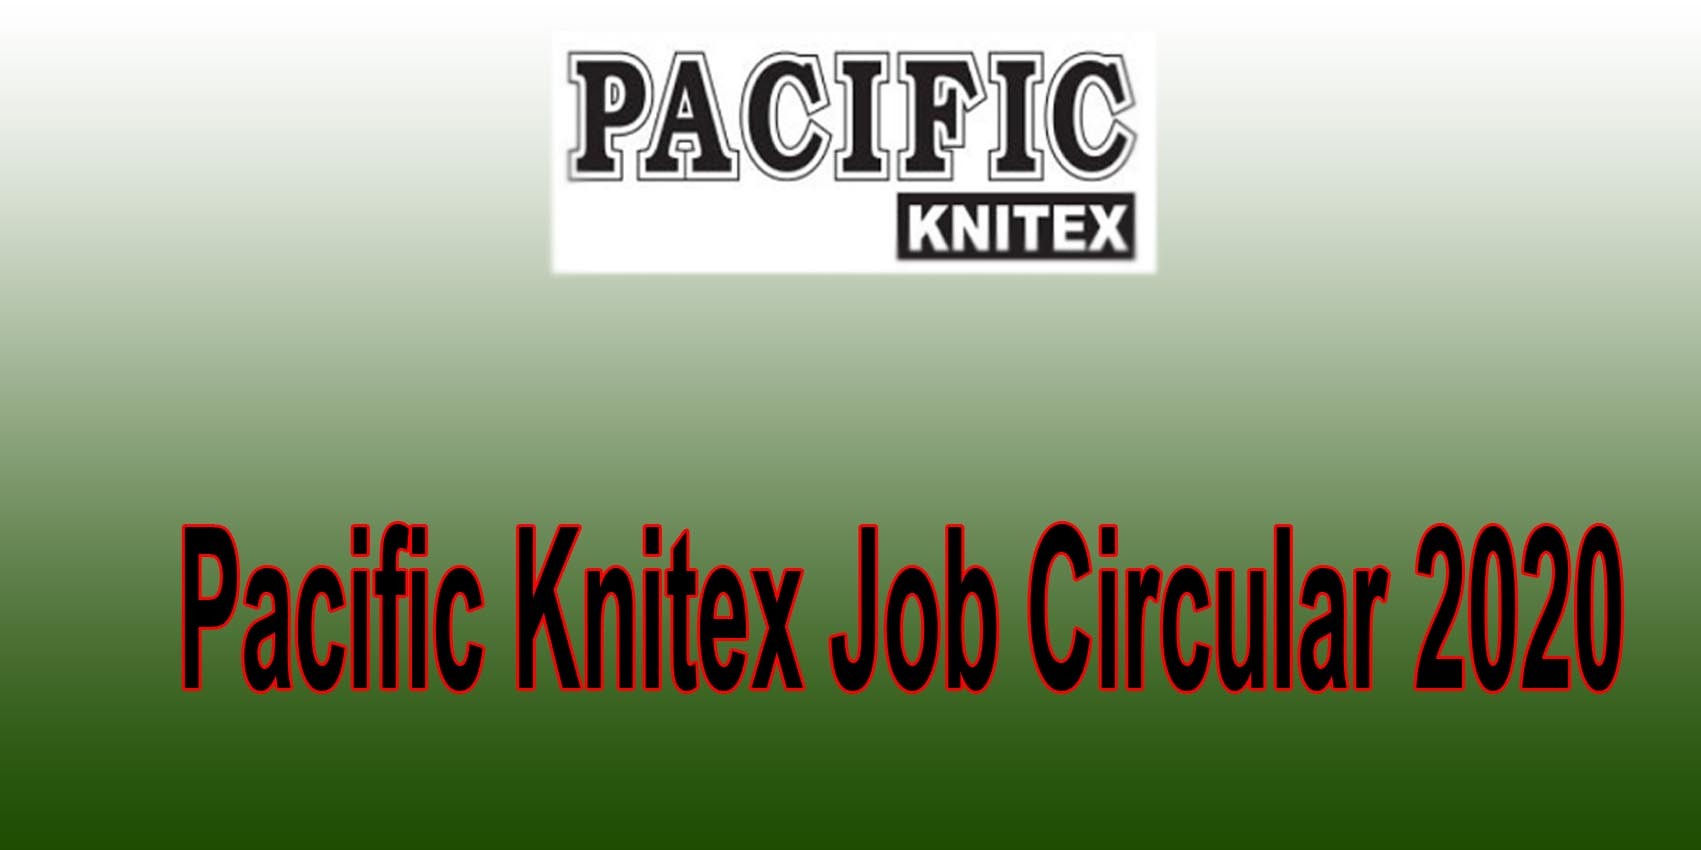 Pacific Knitex Limited